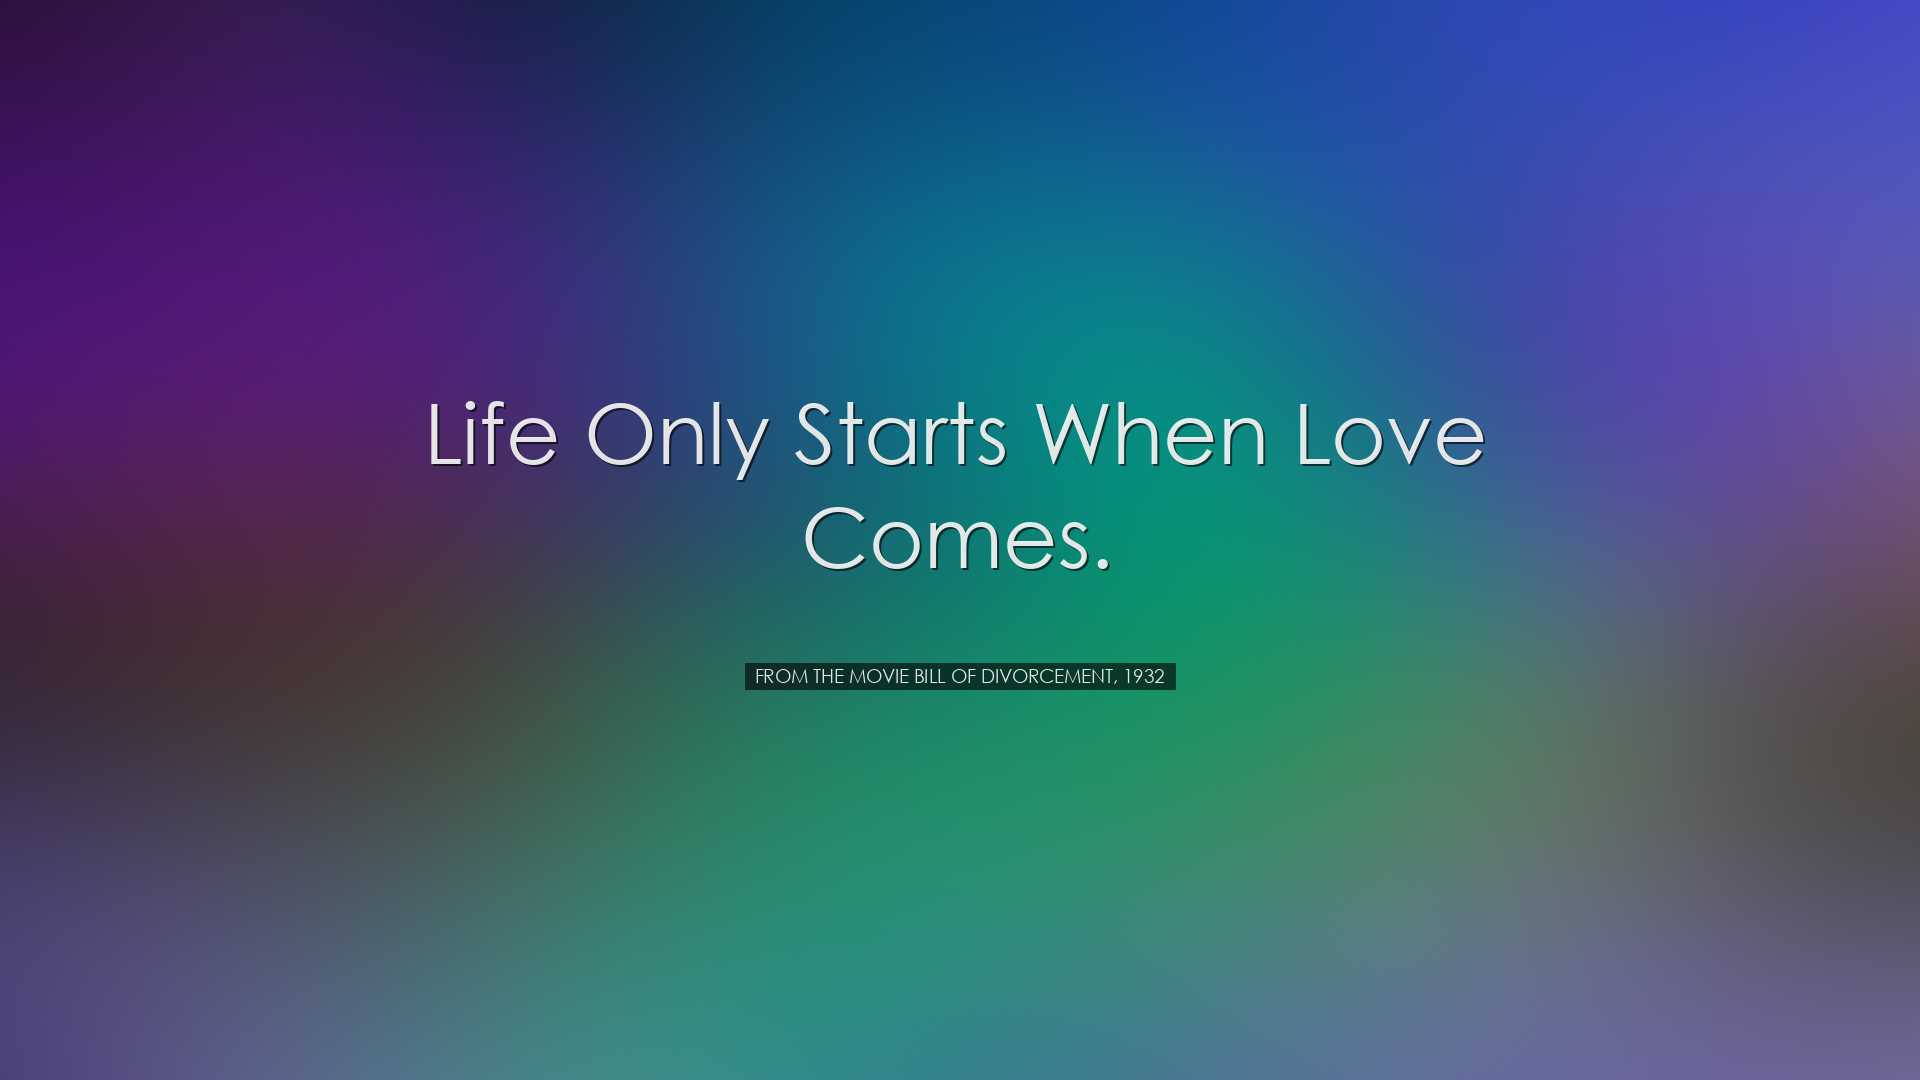 Life only starts when love comes. - From the movie Bill of Divorce